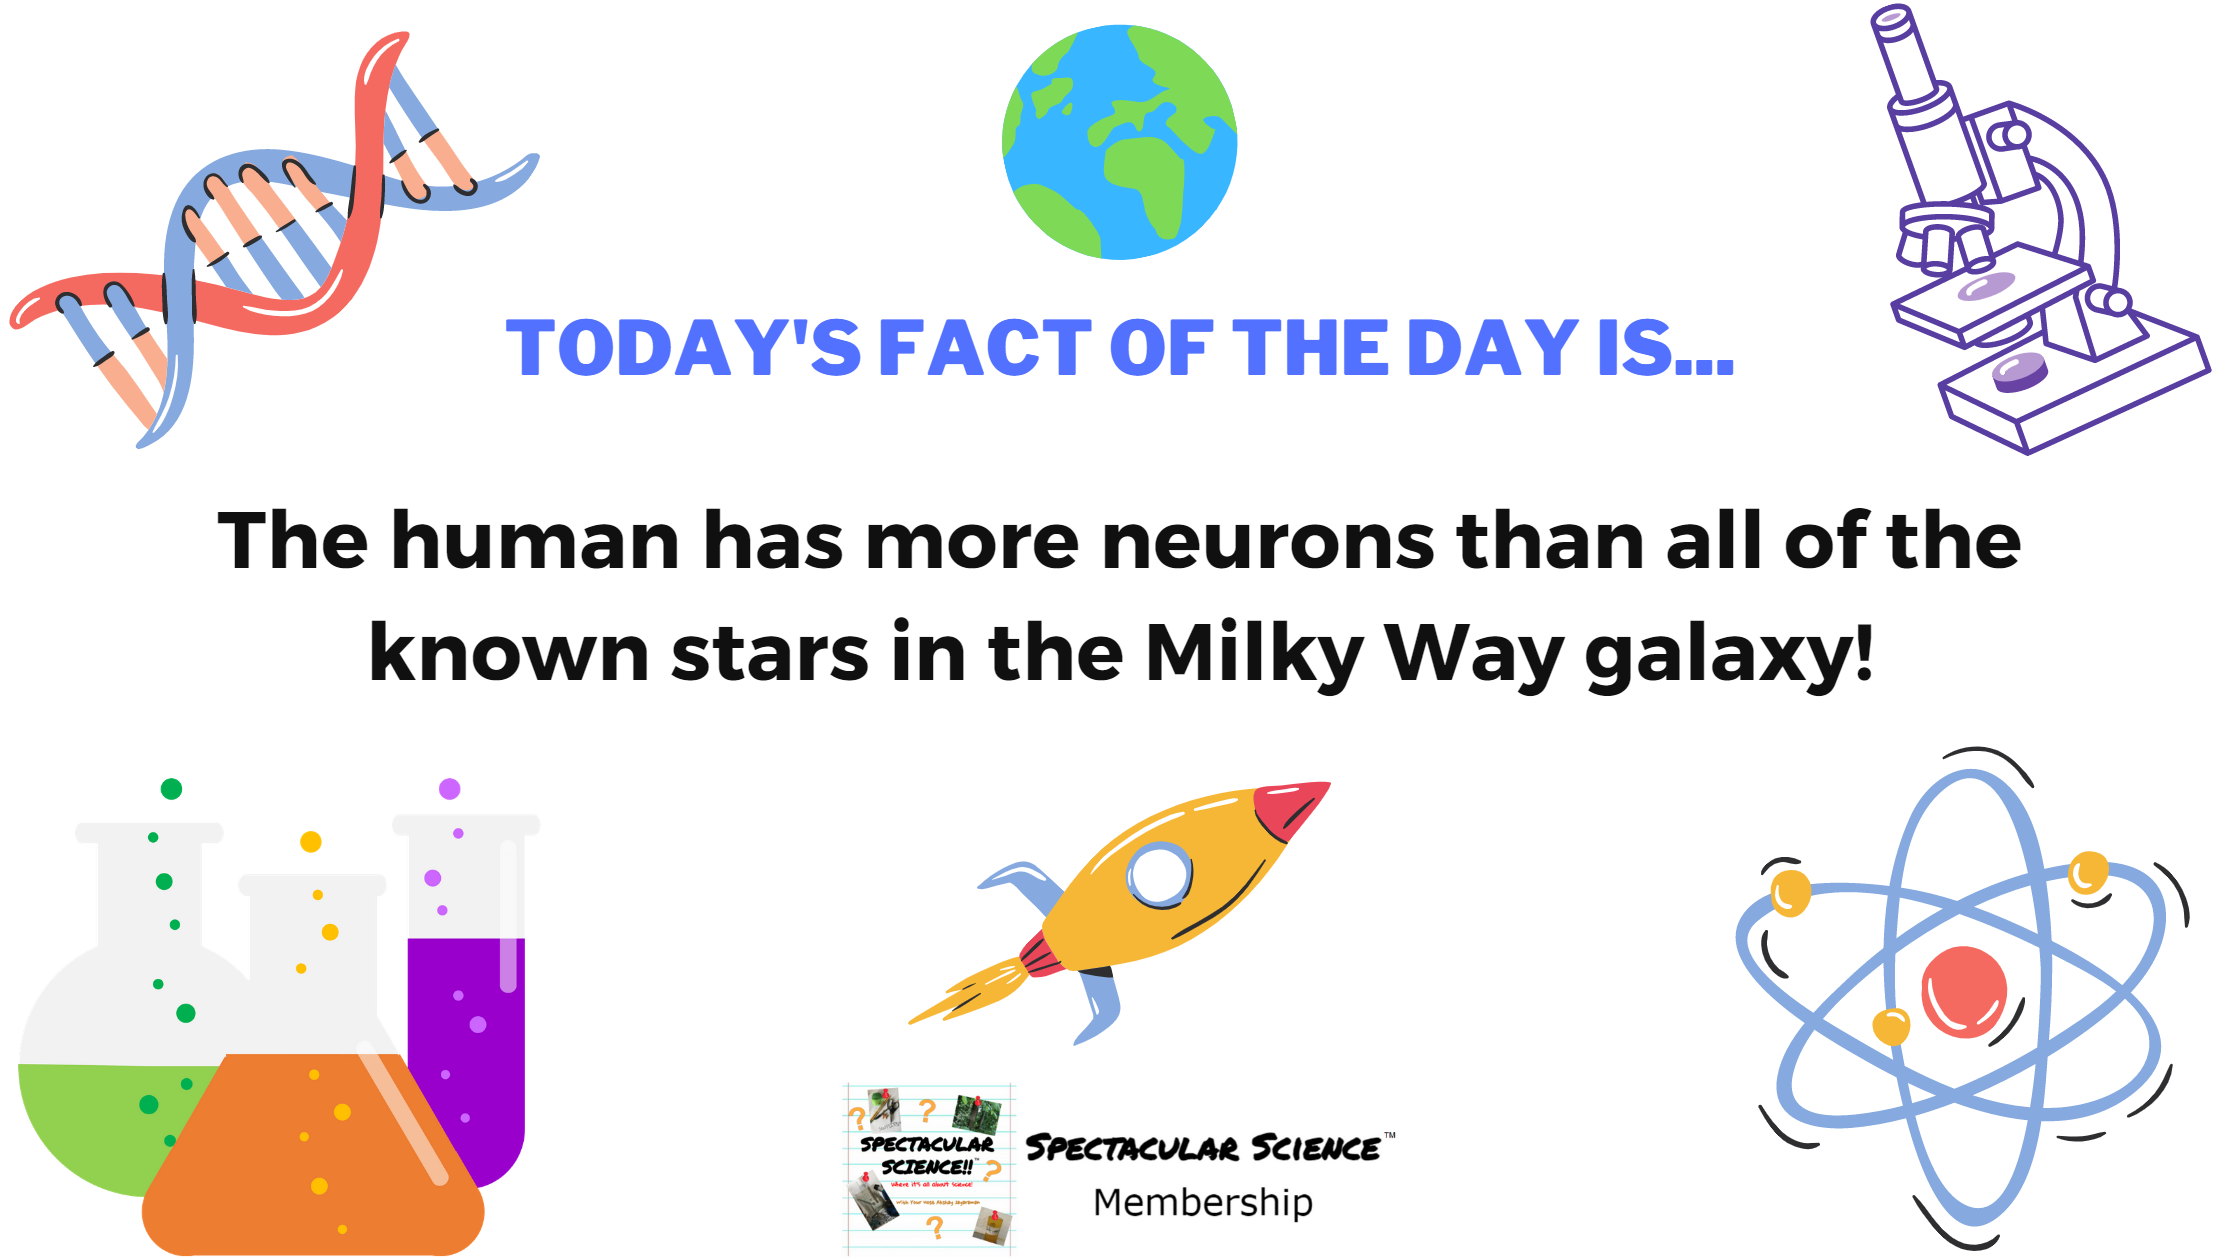 Fact of the Day Image March 11th